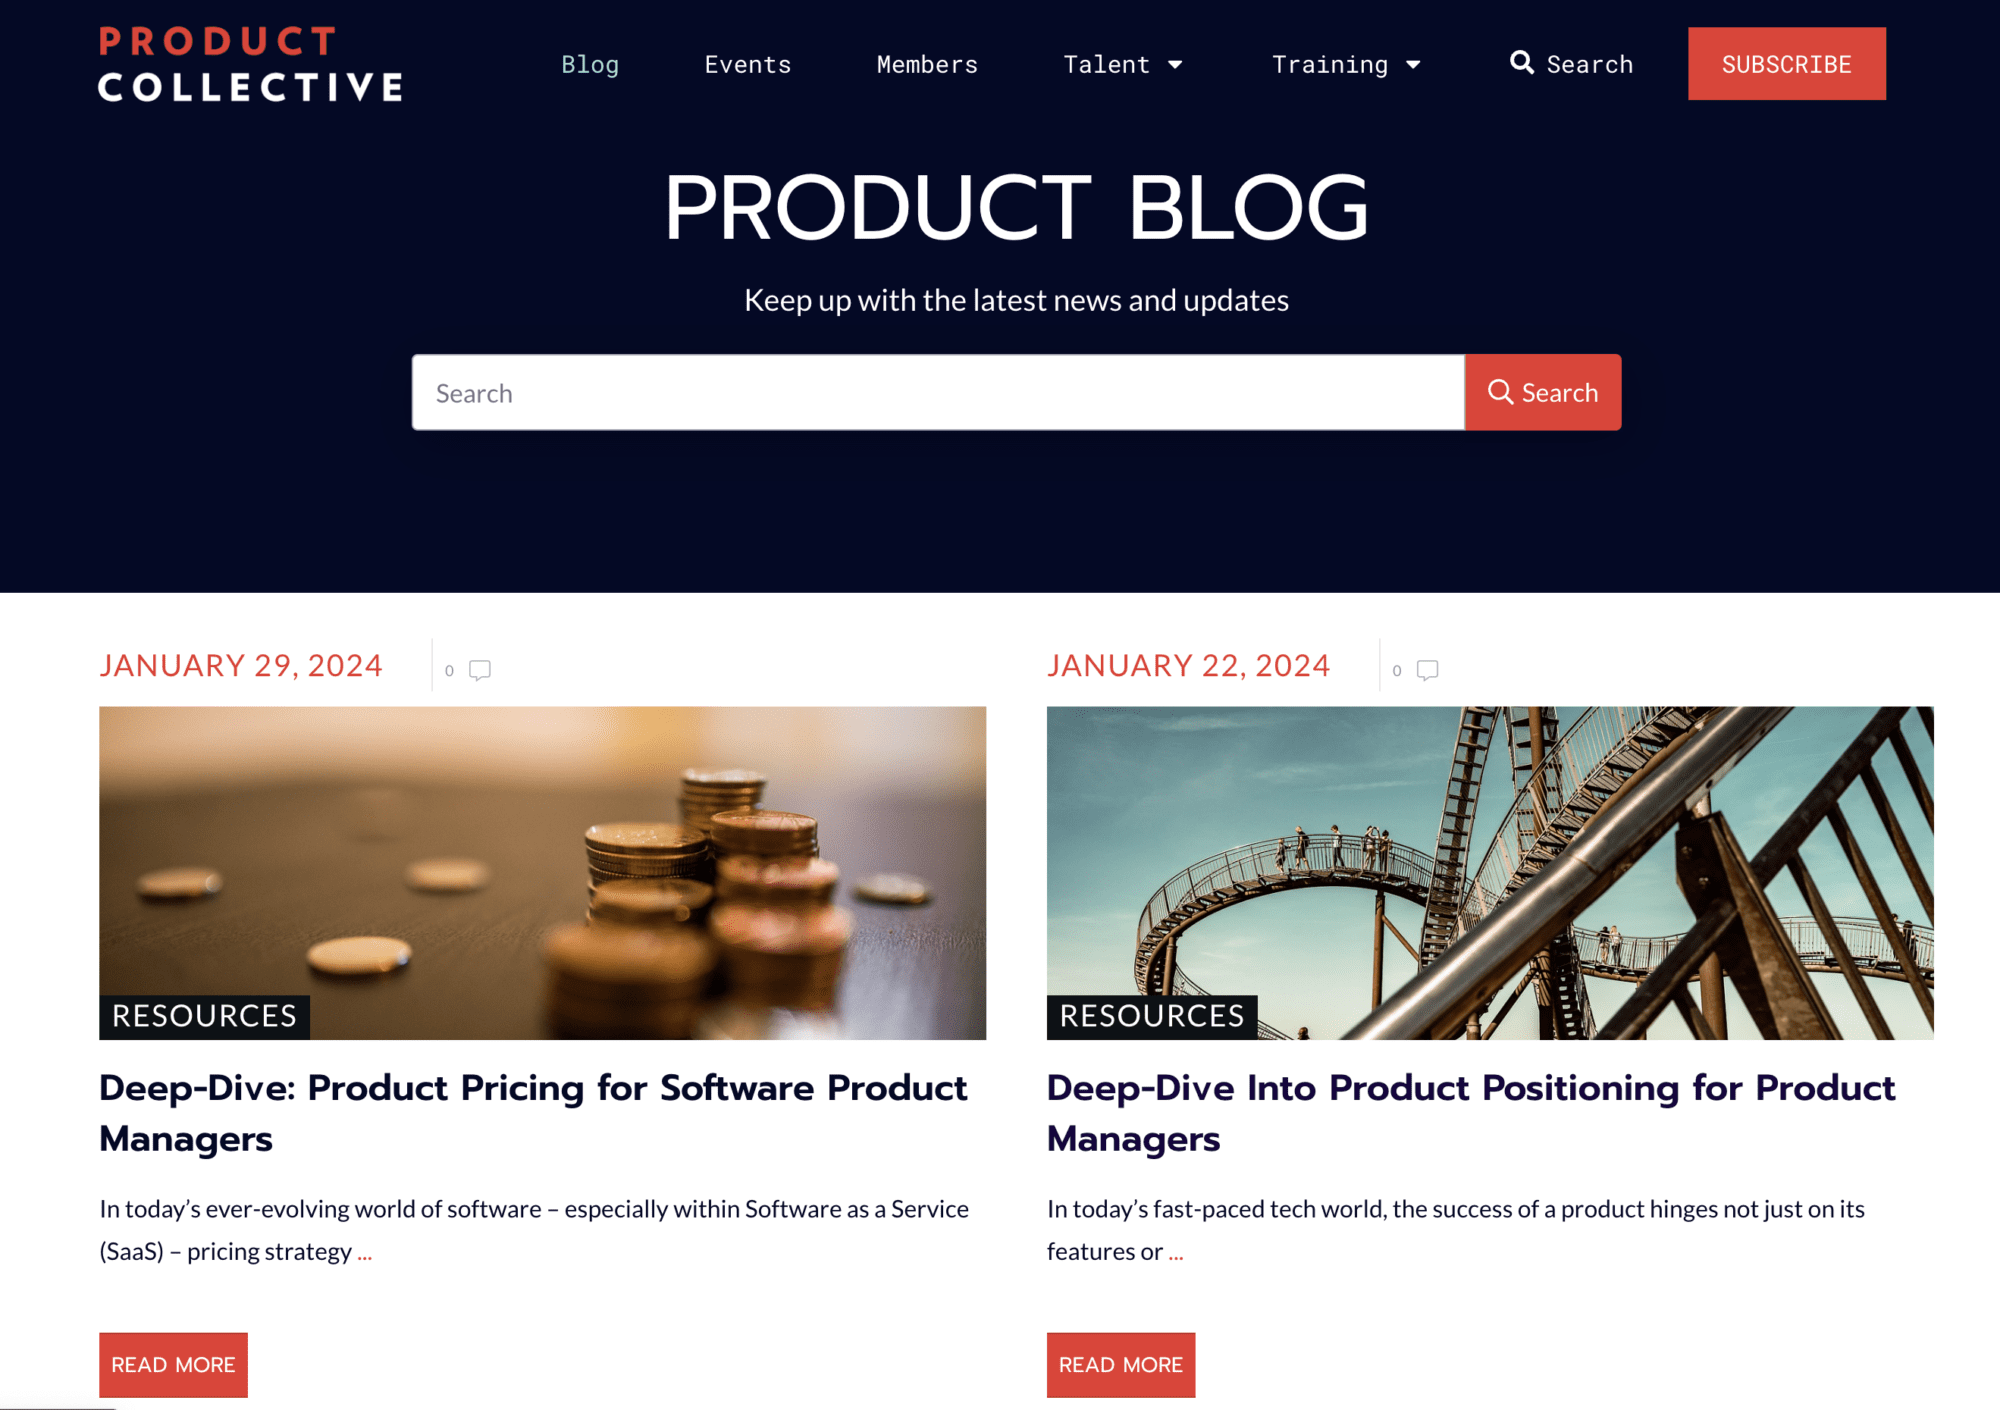 Product Collective blog